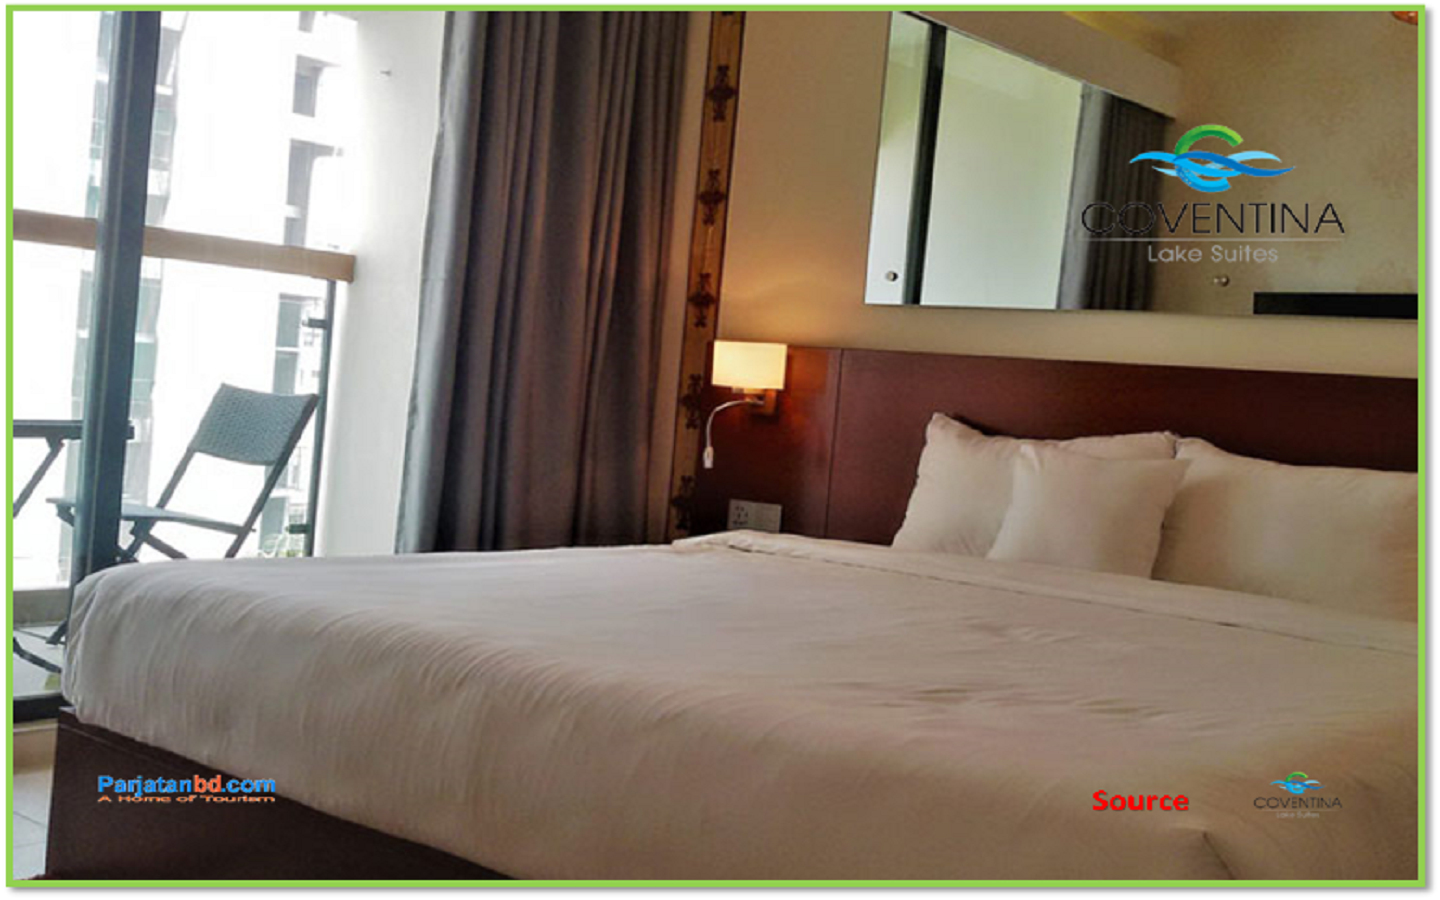 Room Deluxe -1, Coventina Lake Suites- Serviced Apartments, Banani